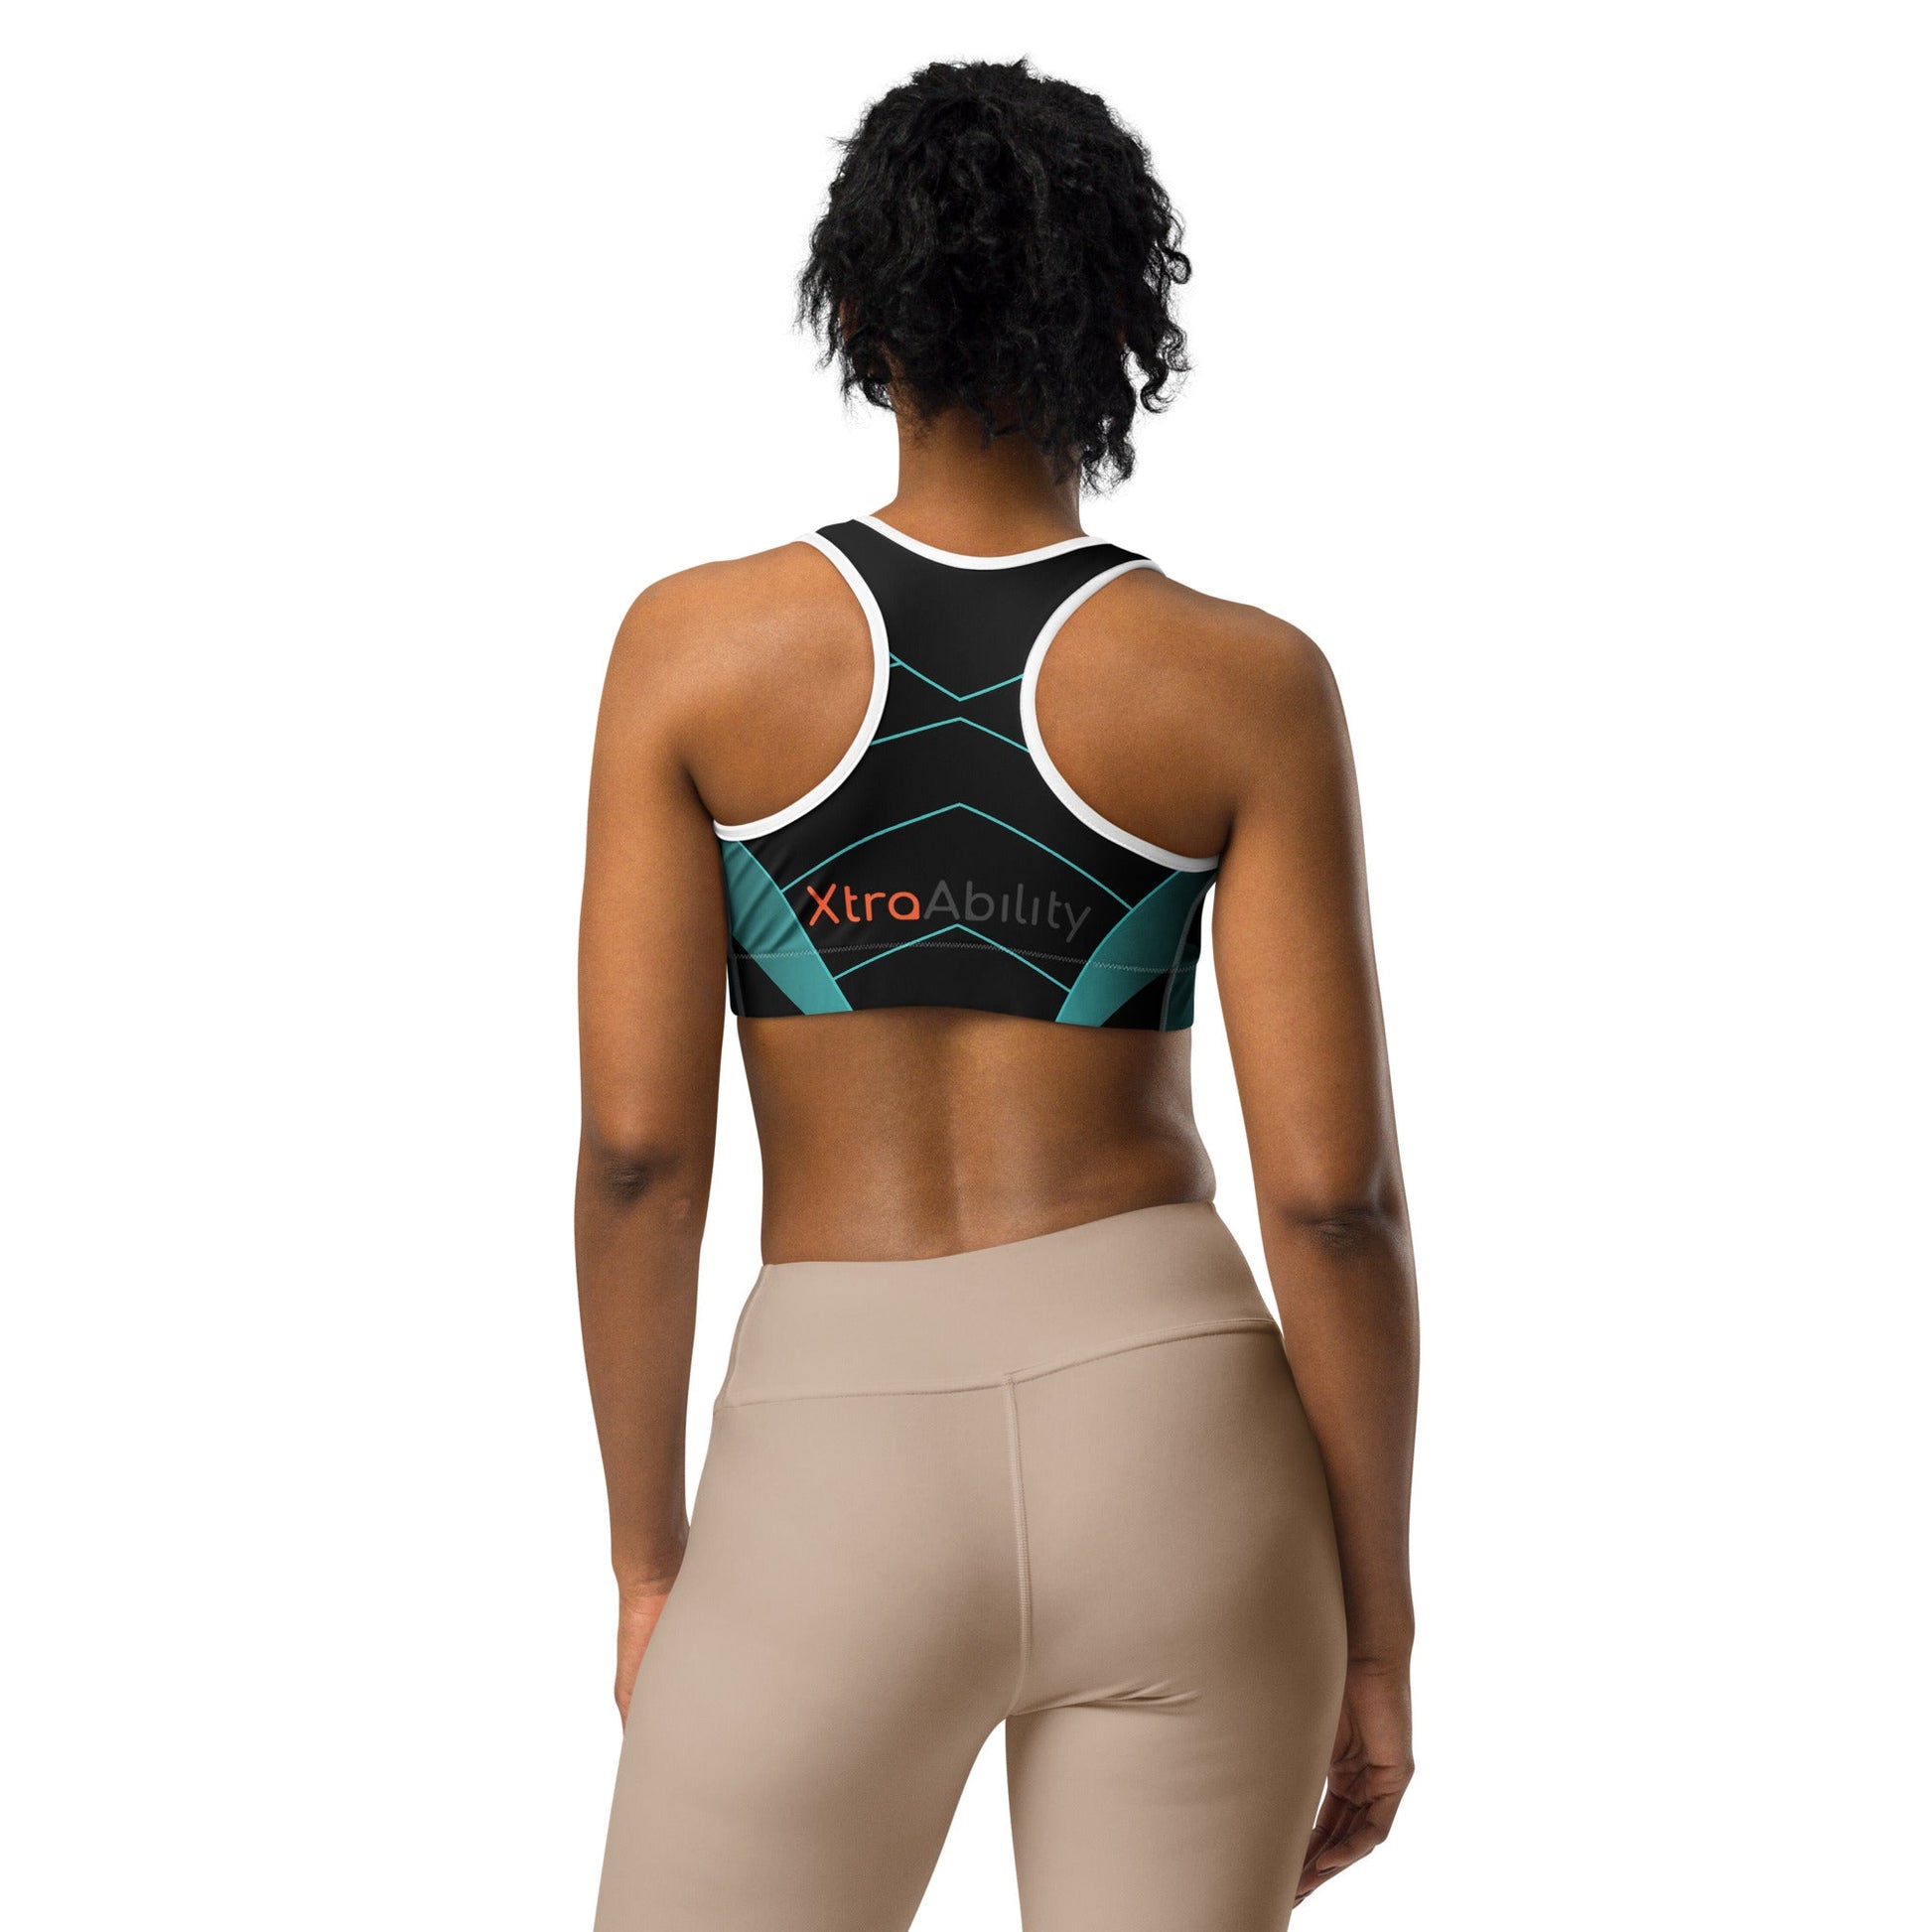 Dynamic Fit Sports Bra - Support and Comfort for All Your Workout Needs